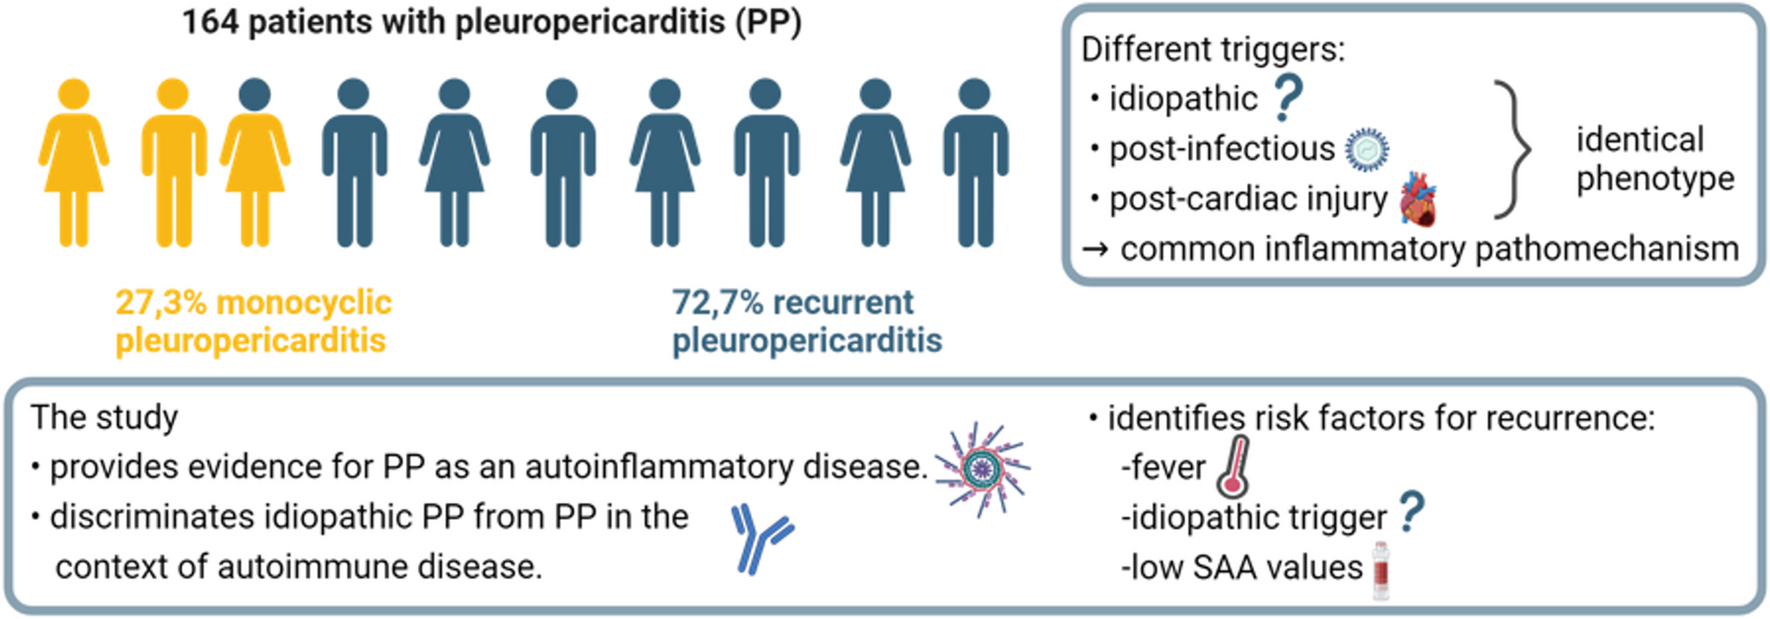 Clinical and serological characterization of acute pleuropericarditis suggests an autoinflammatory pathogenesis and highlights risk factors for recurrent attacks